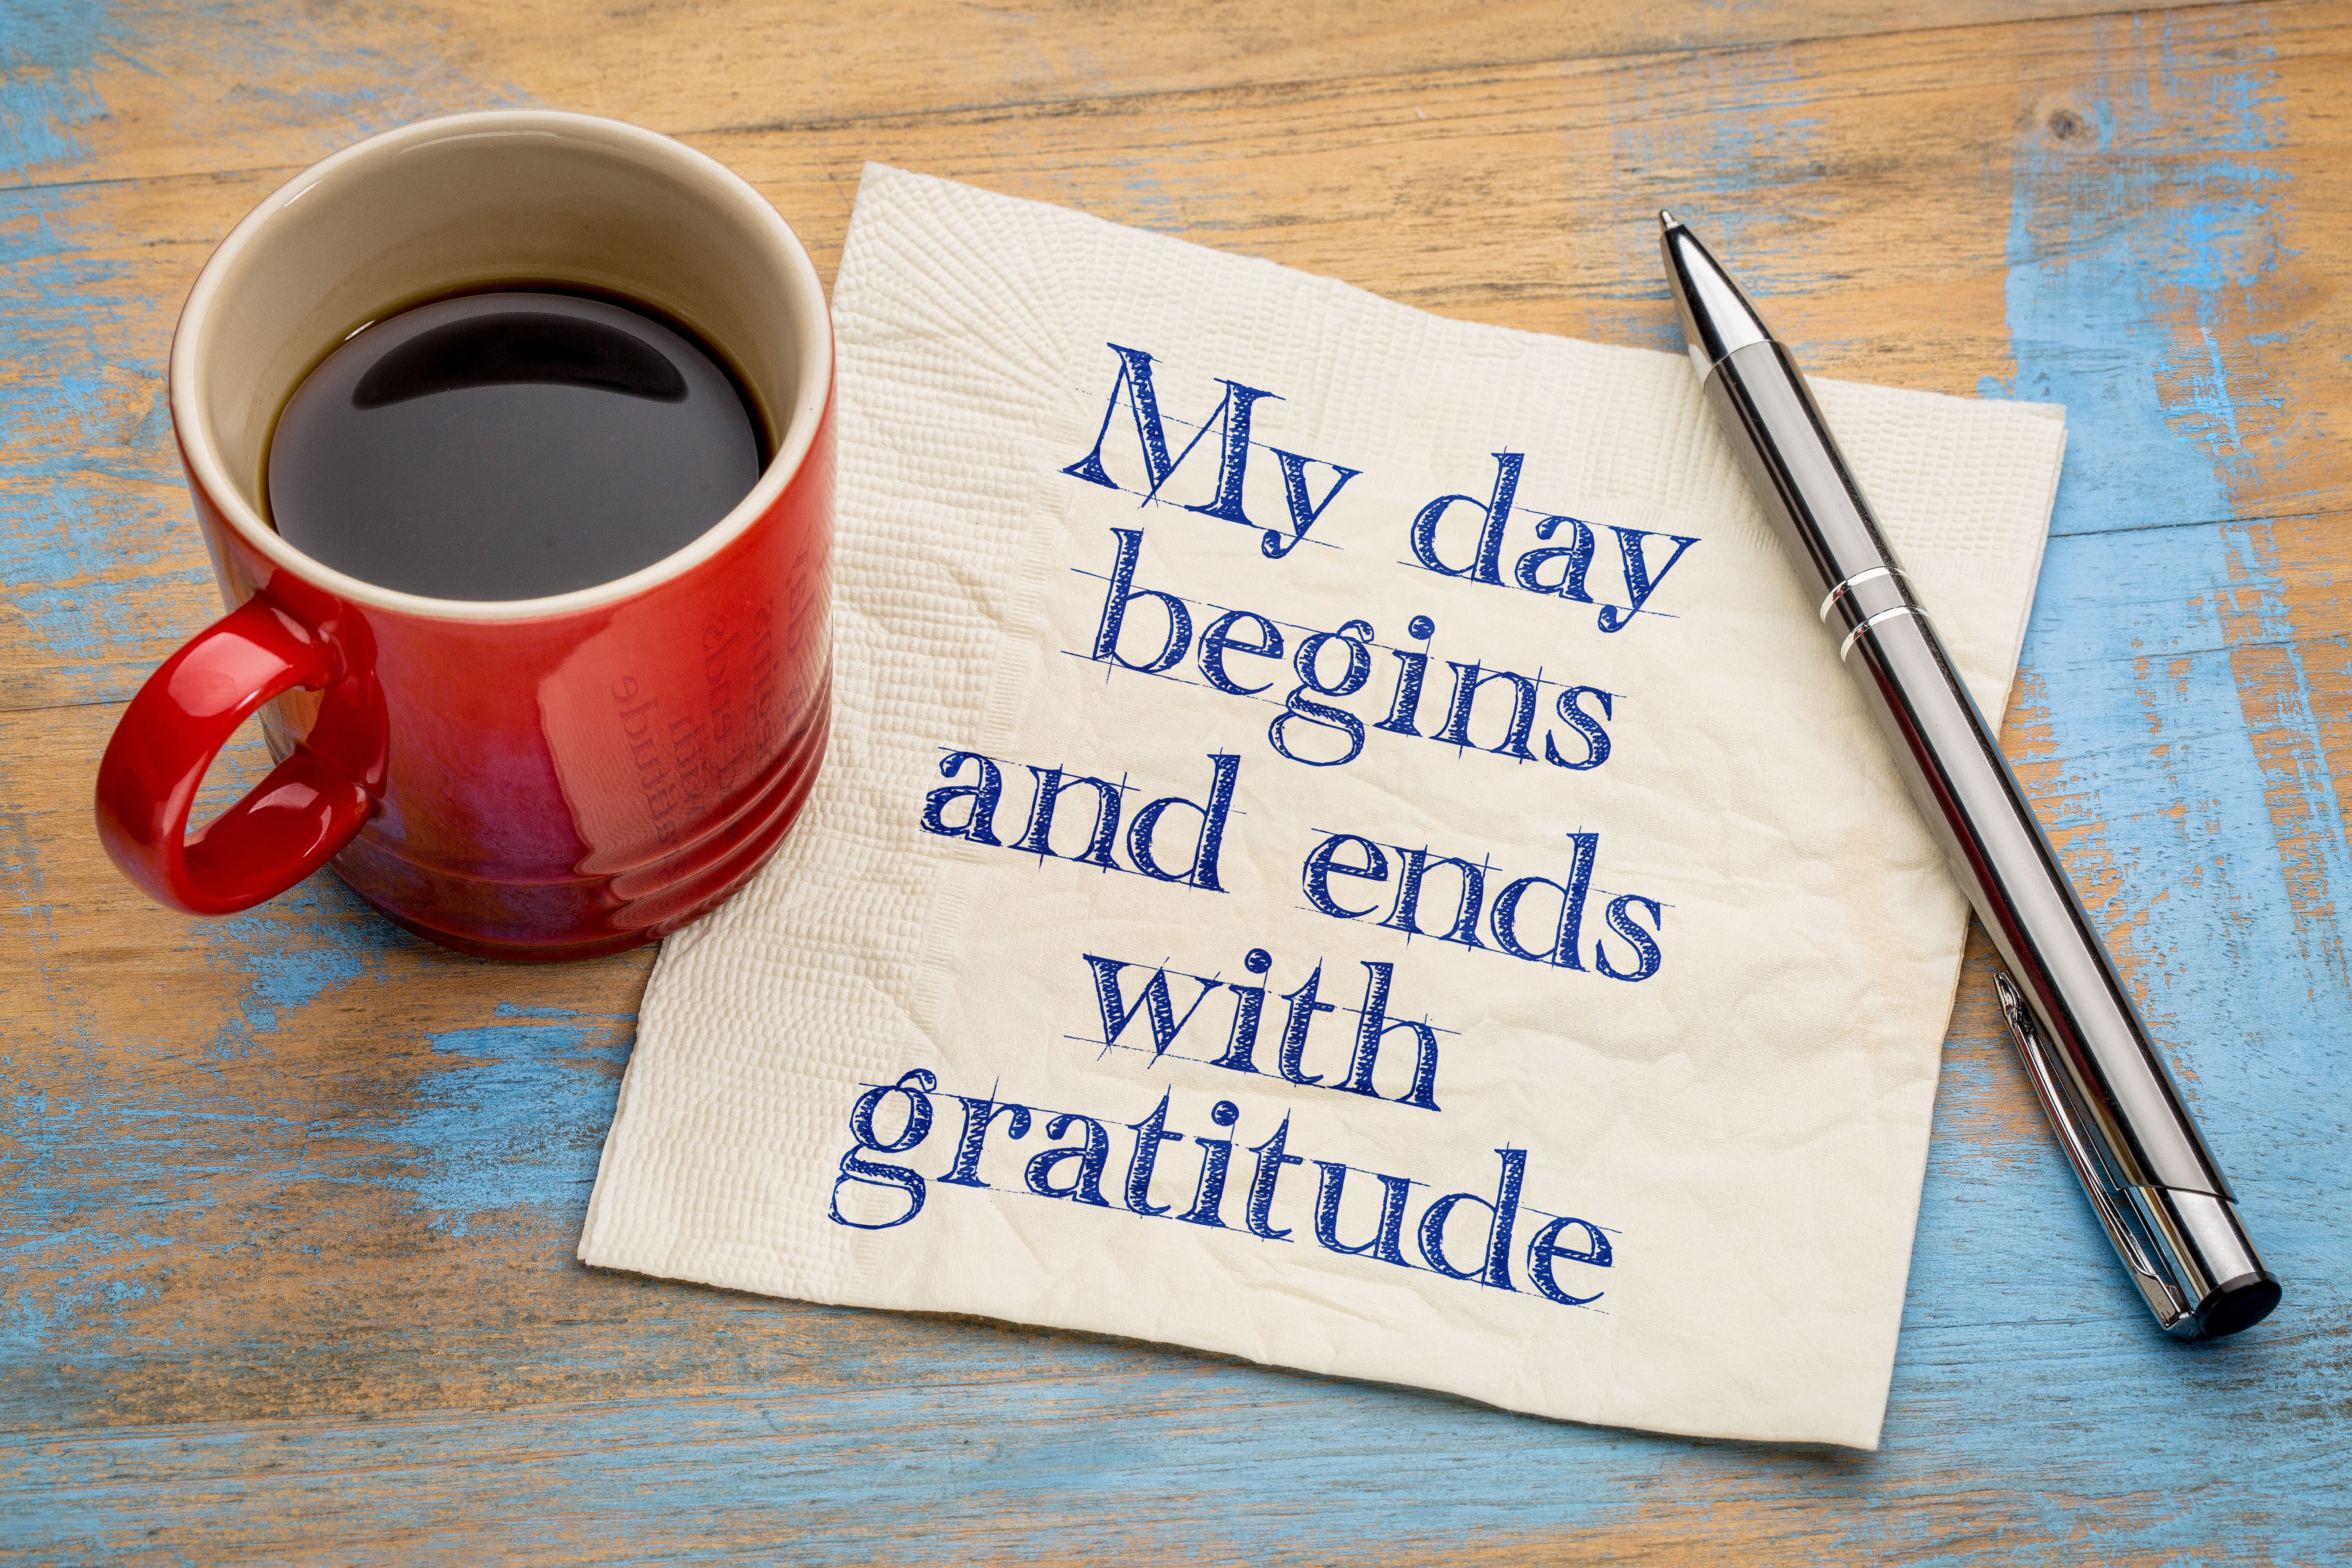 An image of a full coffee cup sat on a blue-washed wooden surface beside a napkin with a positive affirmation reading My day begins and ends with gratitude written on it